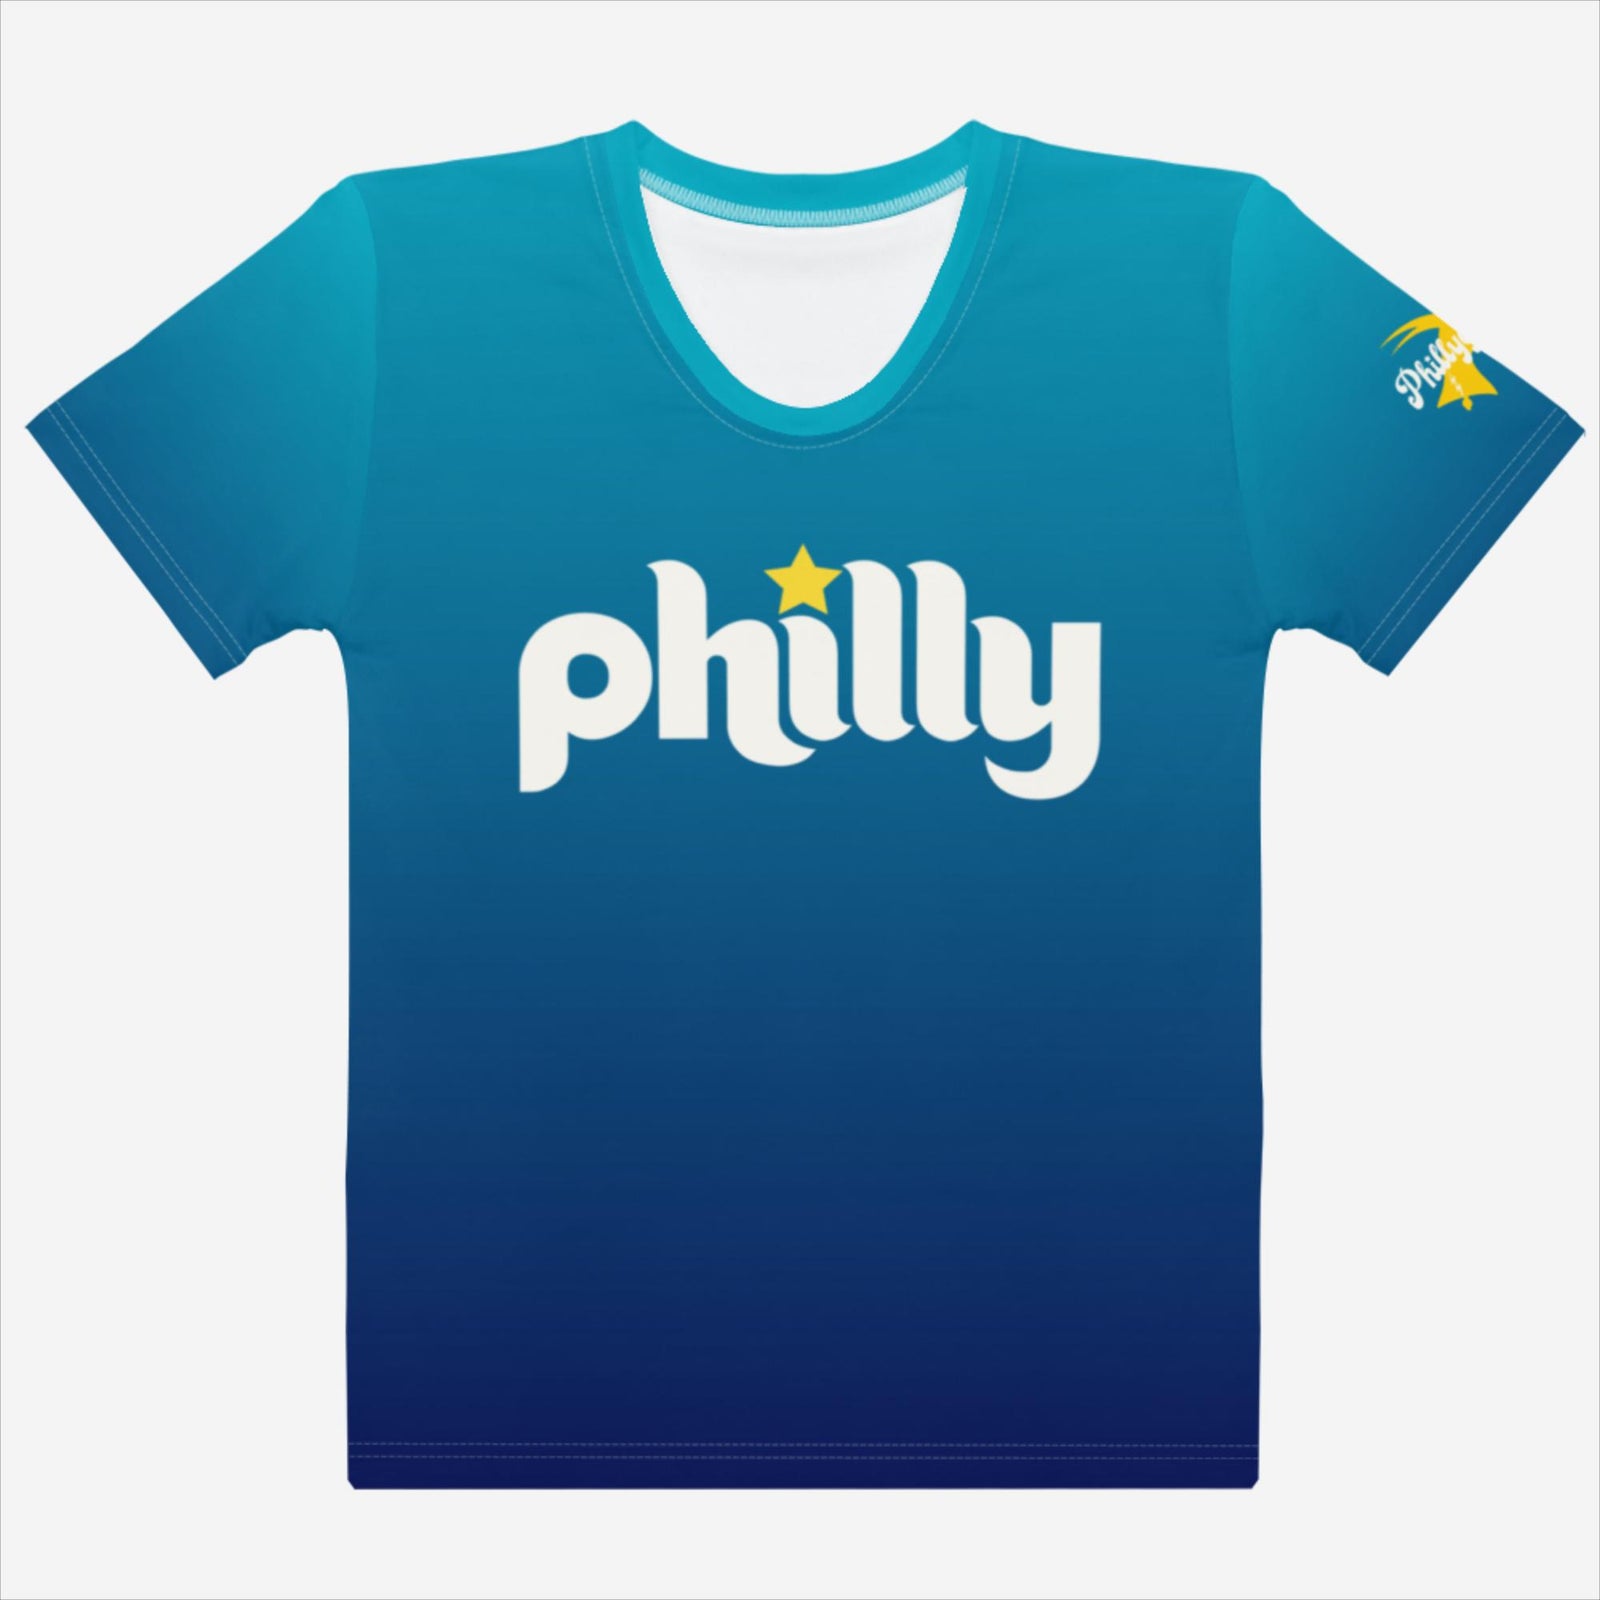 "Philly Connect" Women's Premium Jersey Tee